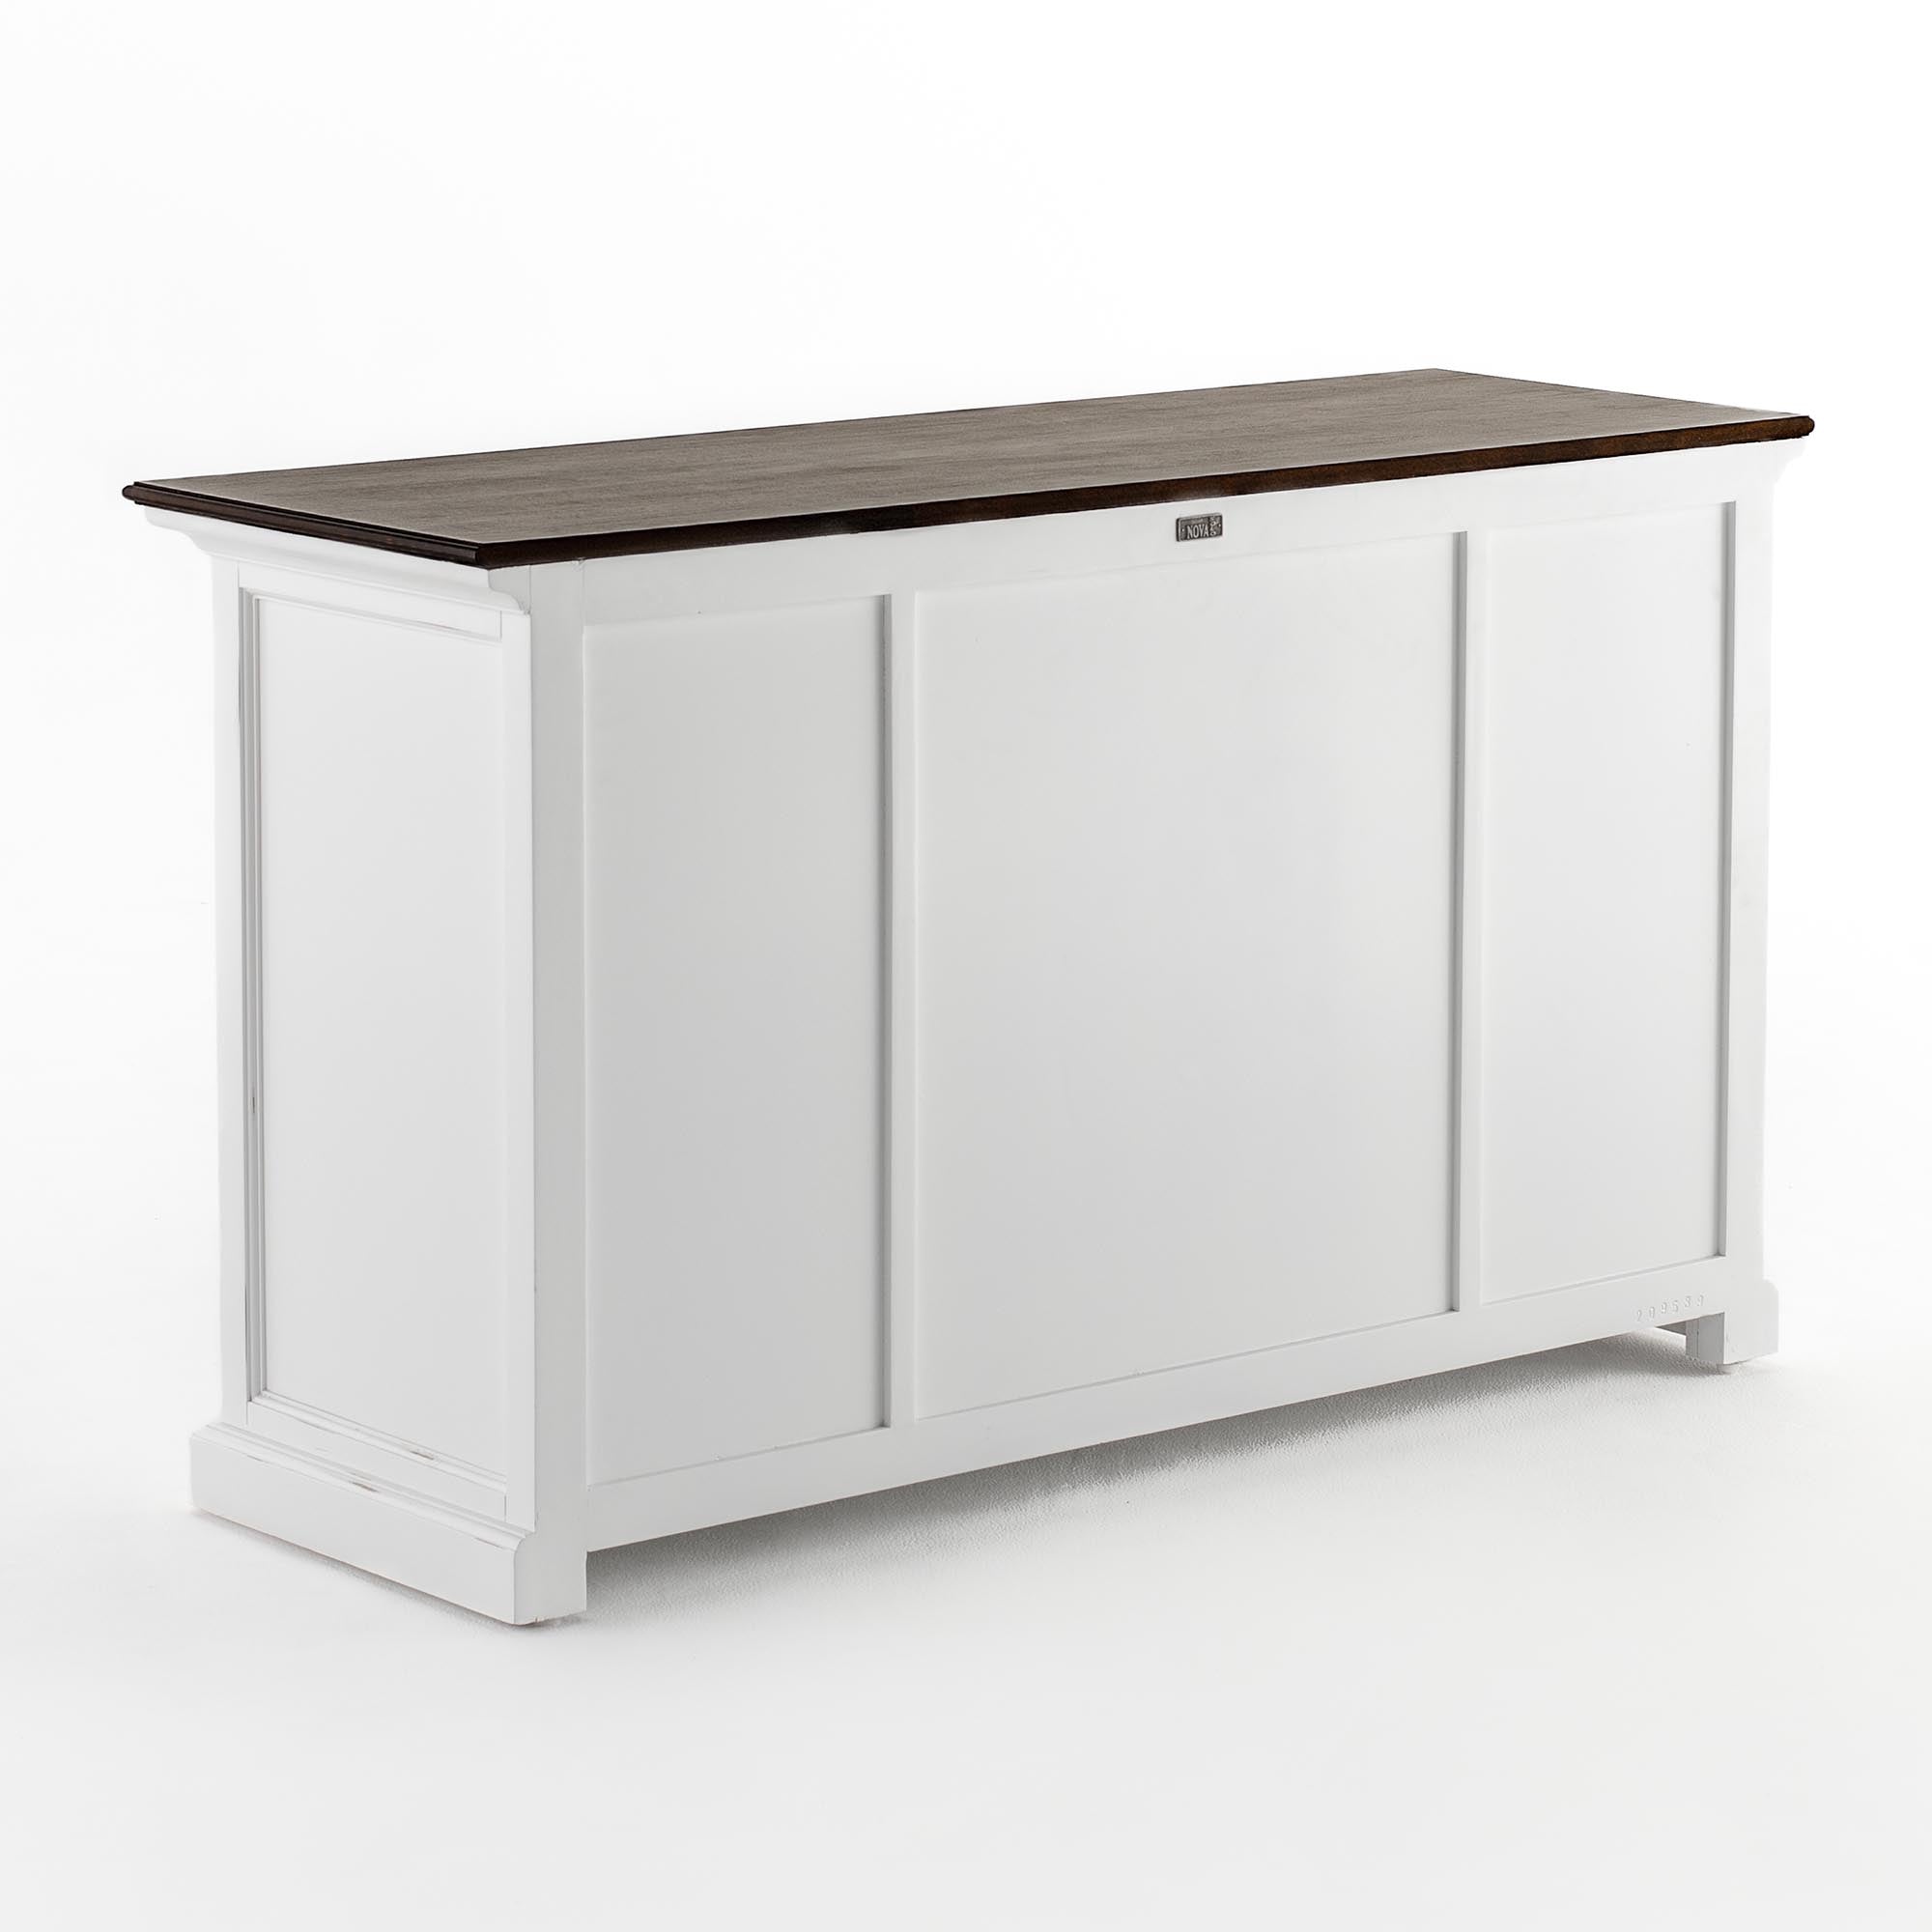 Halifax Accent Coastal White & Brown Buffet with 4 Doors 3 Drawers